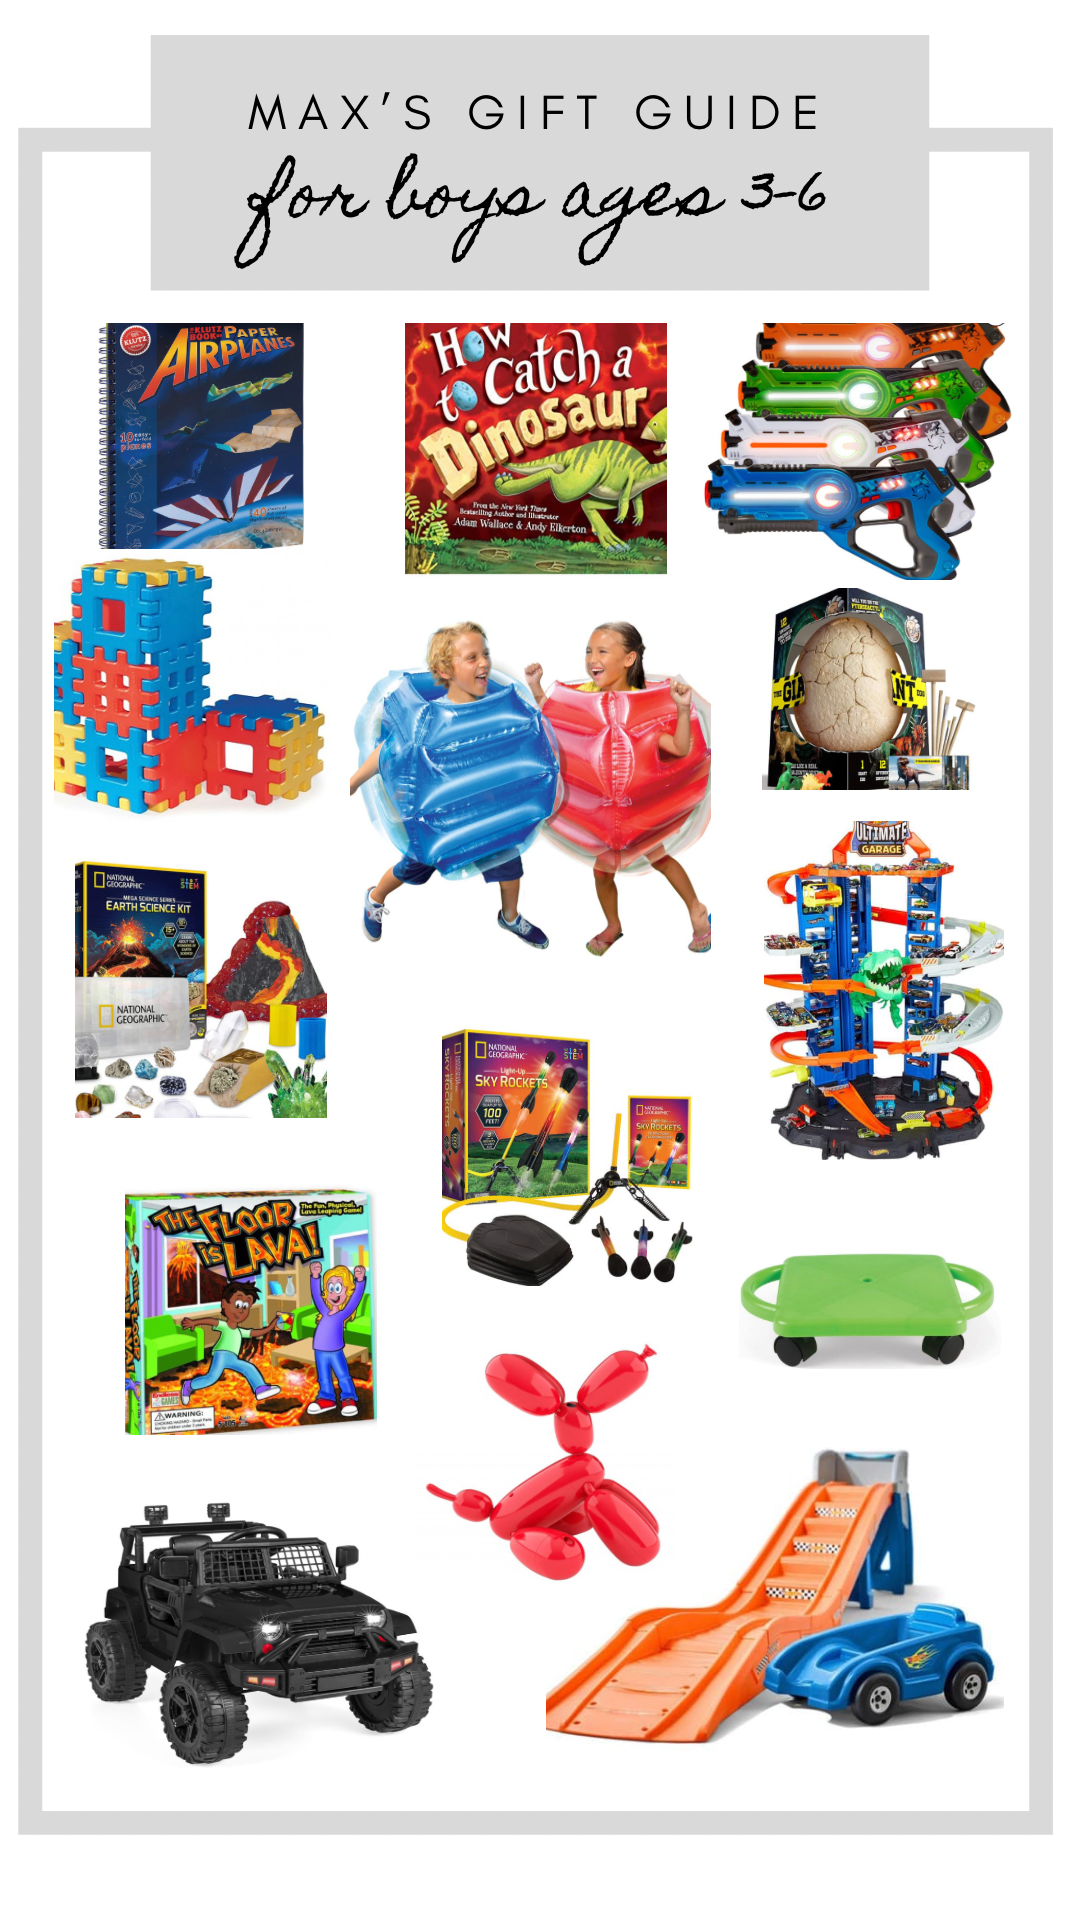 Max's Gift Guide (For boy's ages 3-6) — Bay Area Moms